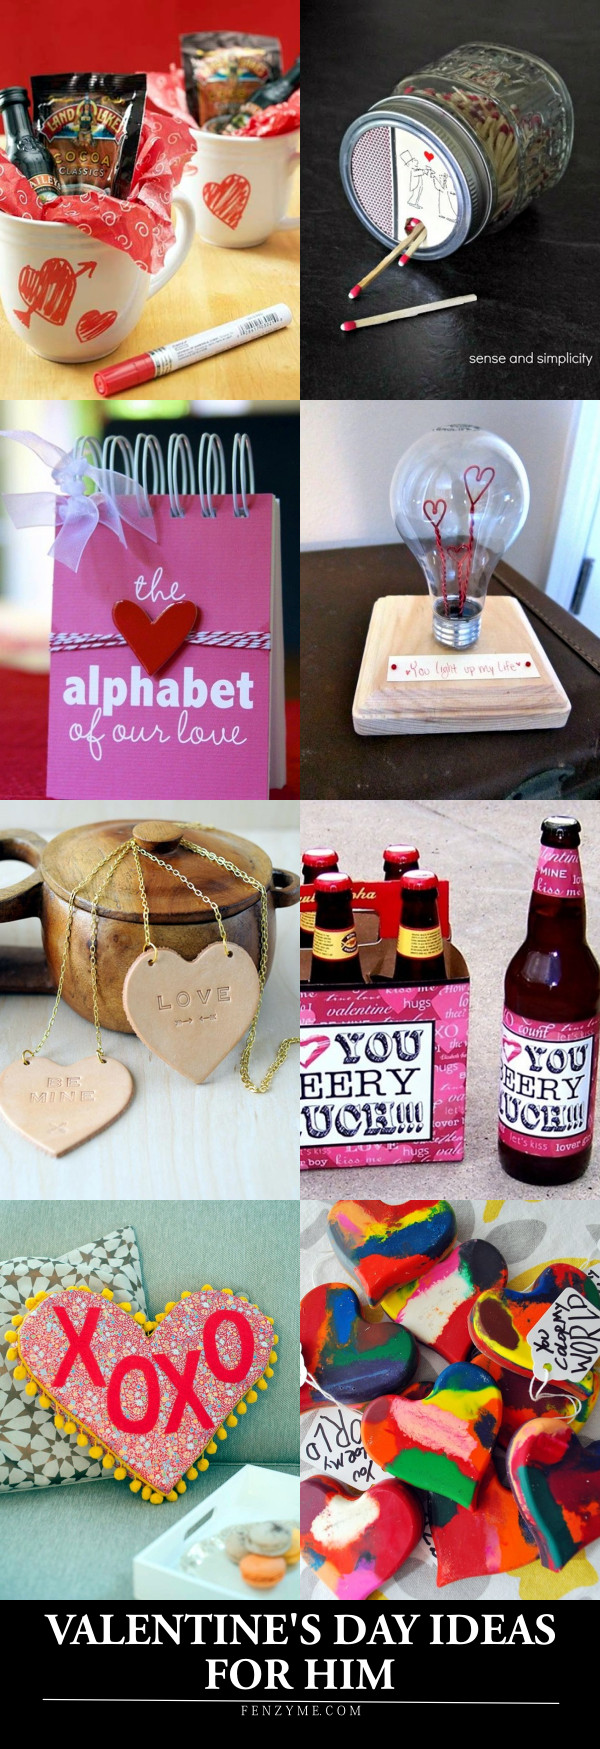 Valentine Day Gift Ideas For Him Diy
 101 Homemade Valentines Day Ideas for Him that re really CUTE